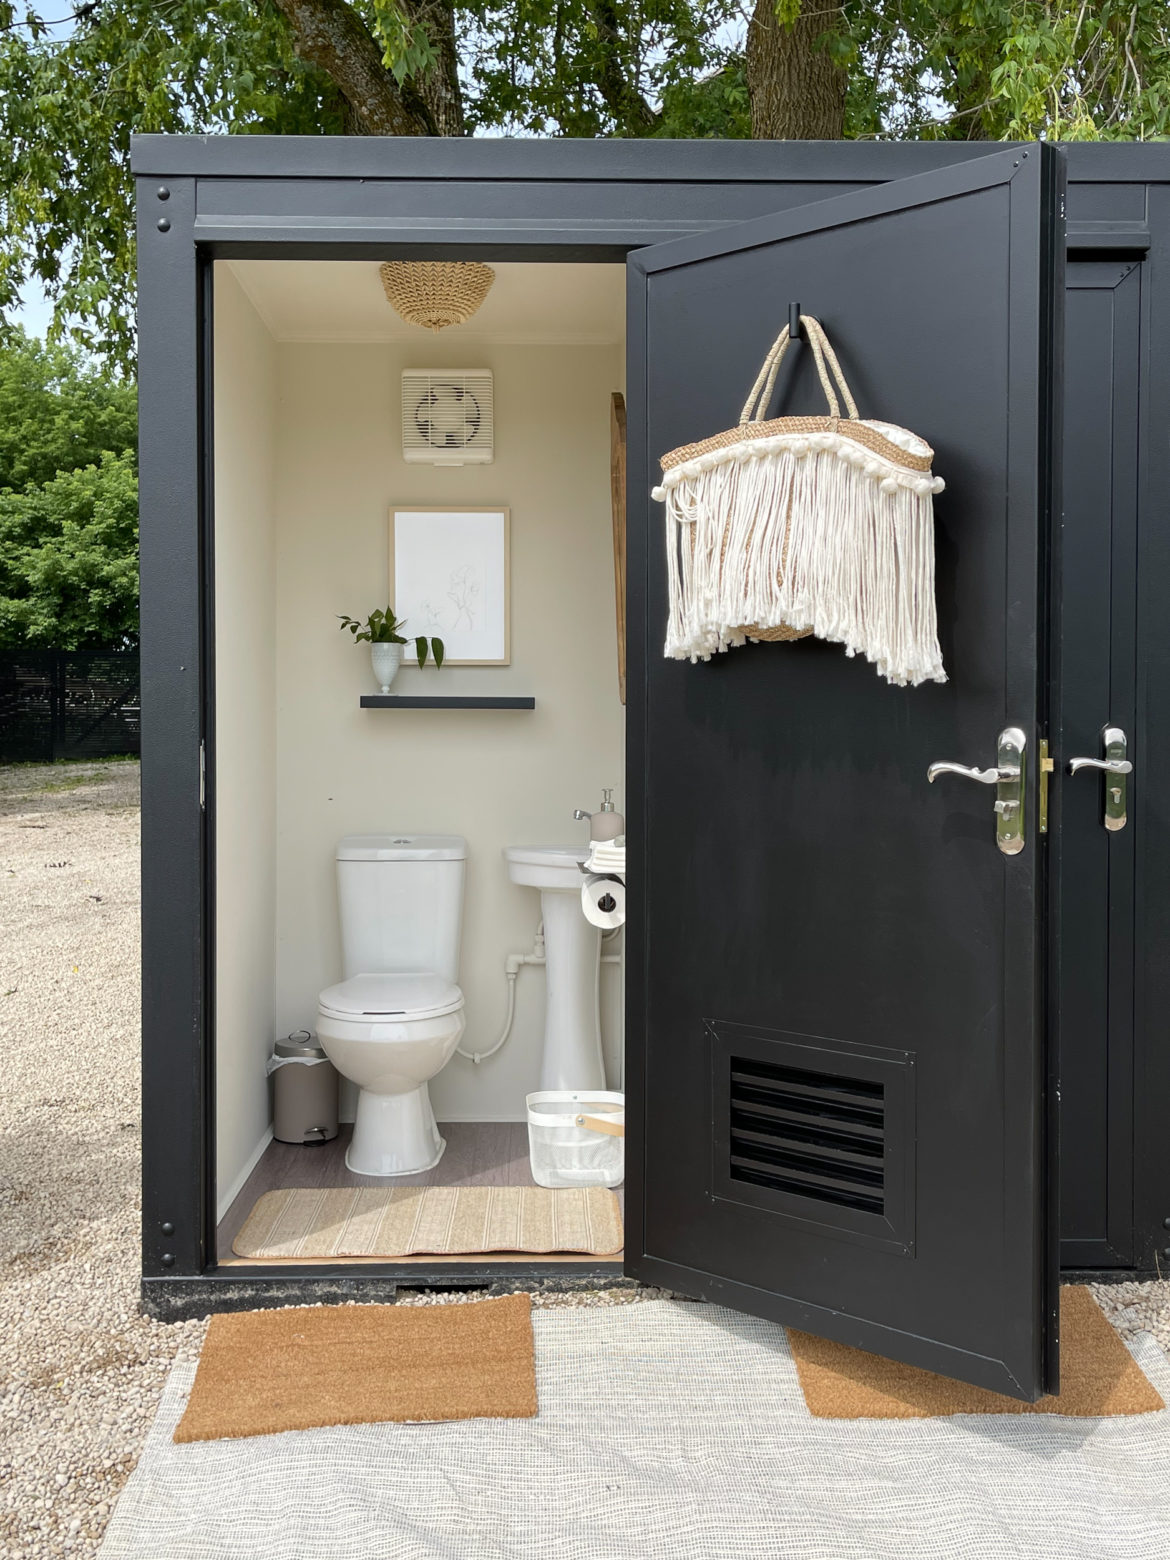 Porta potty design ideas - how to make your portable toilet look incredible. Fab decor and design tips.